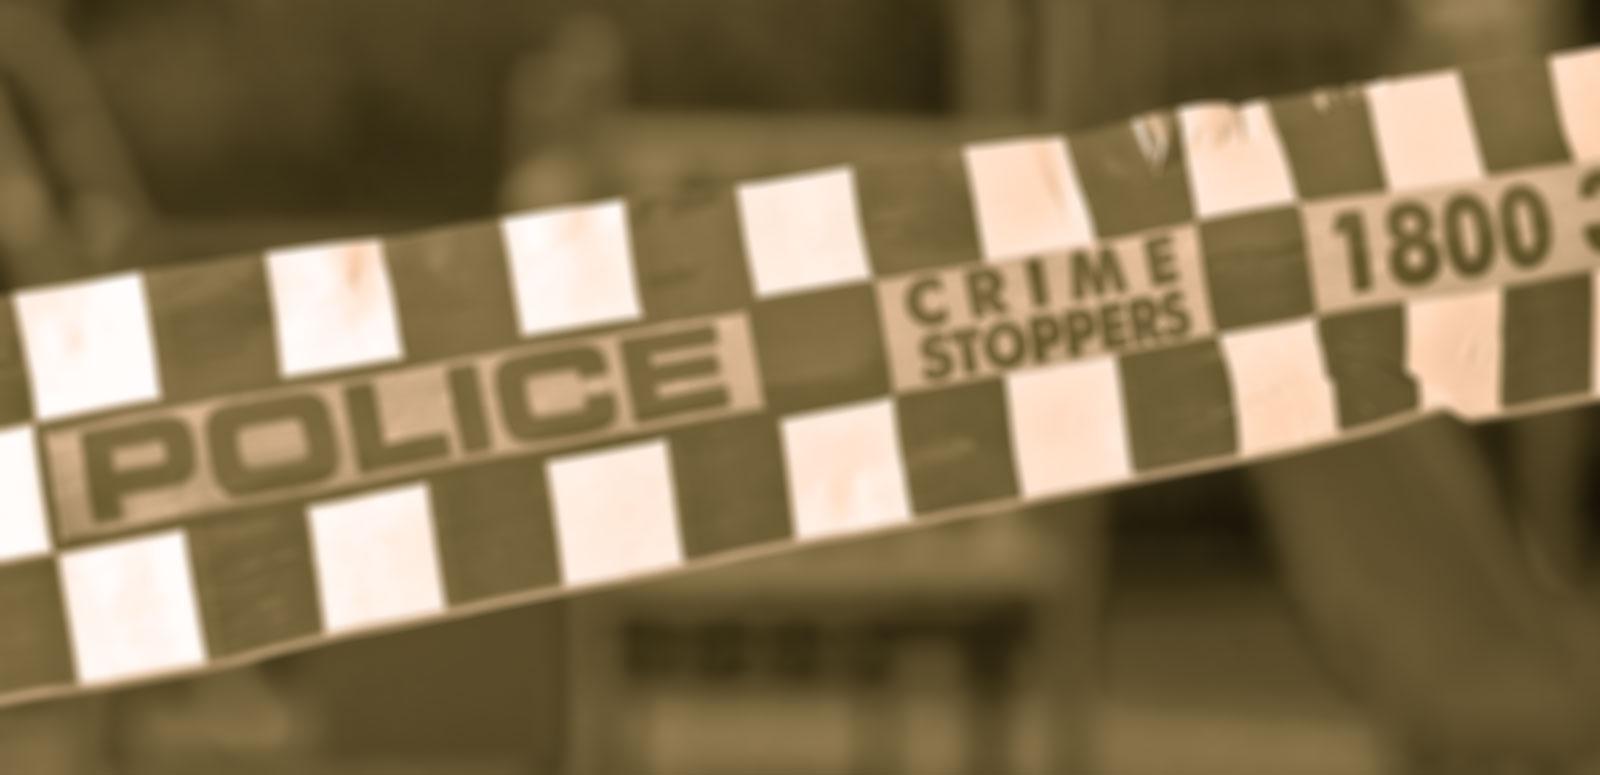 A sepia-toned shot of some checkered police tape with the words Police and Crime Stoppers written on it.